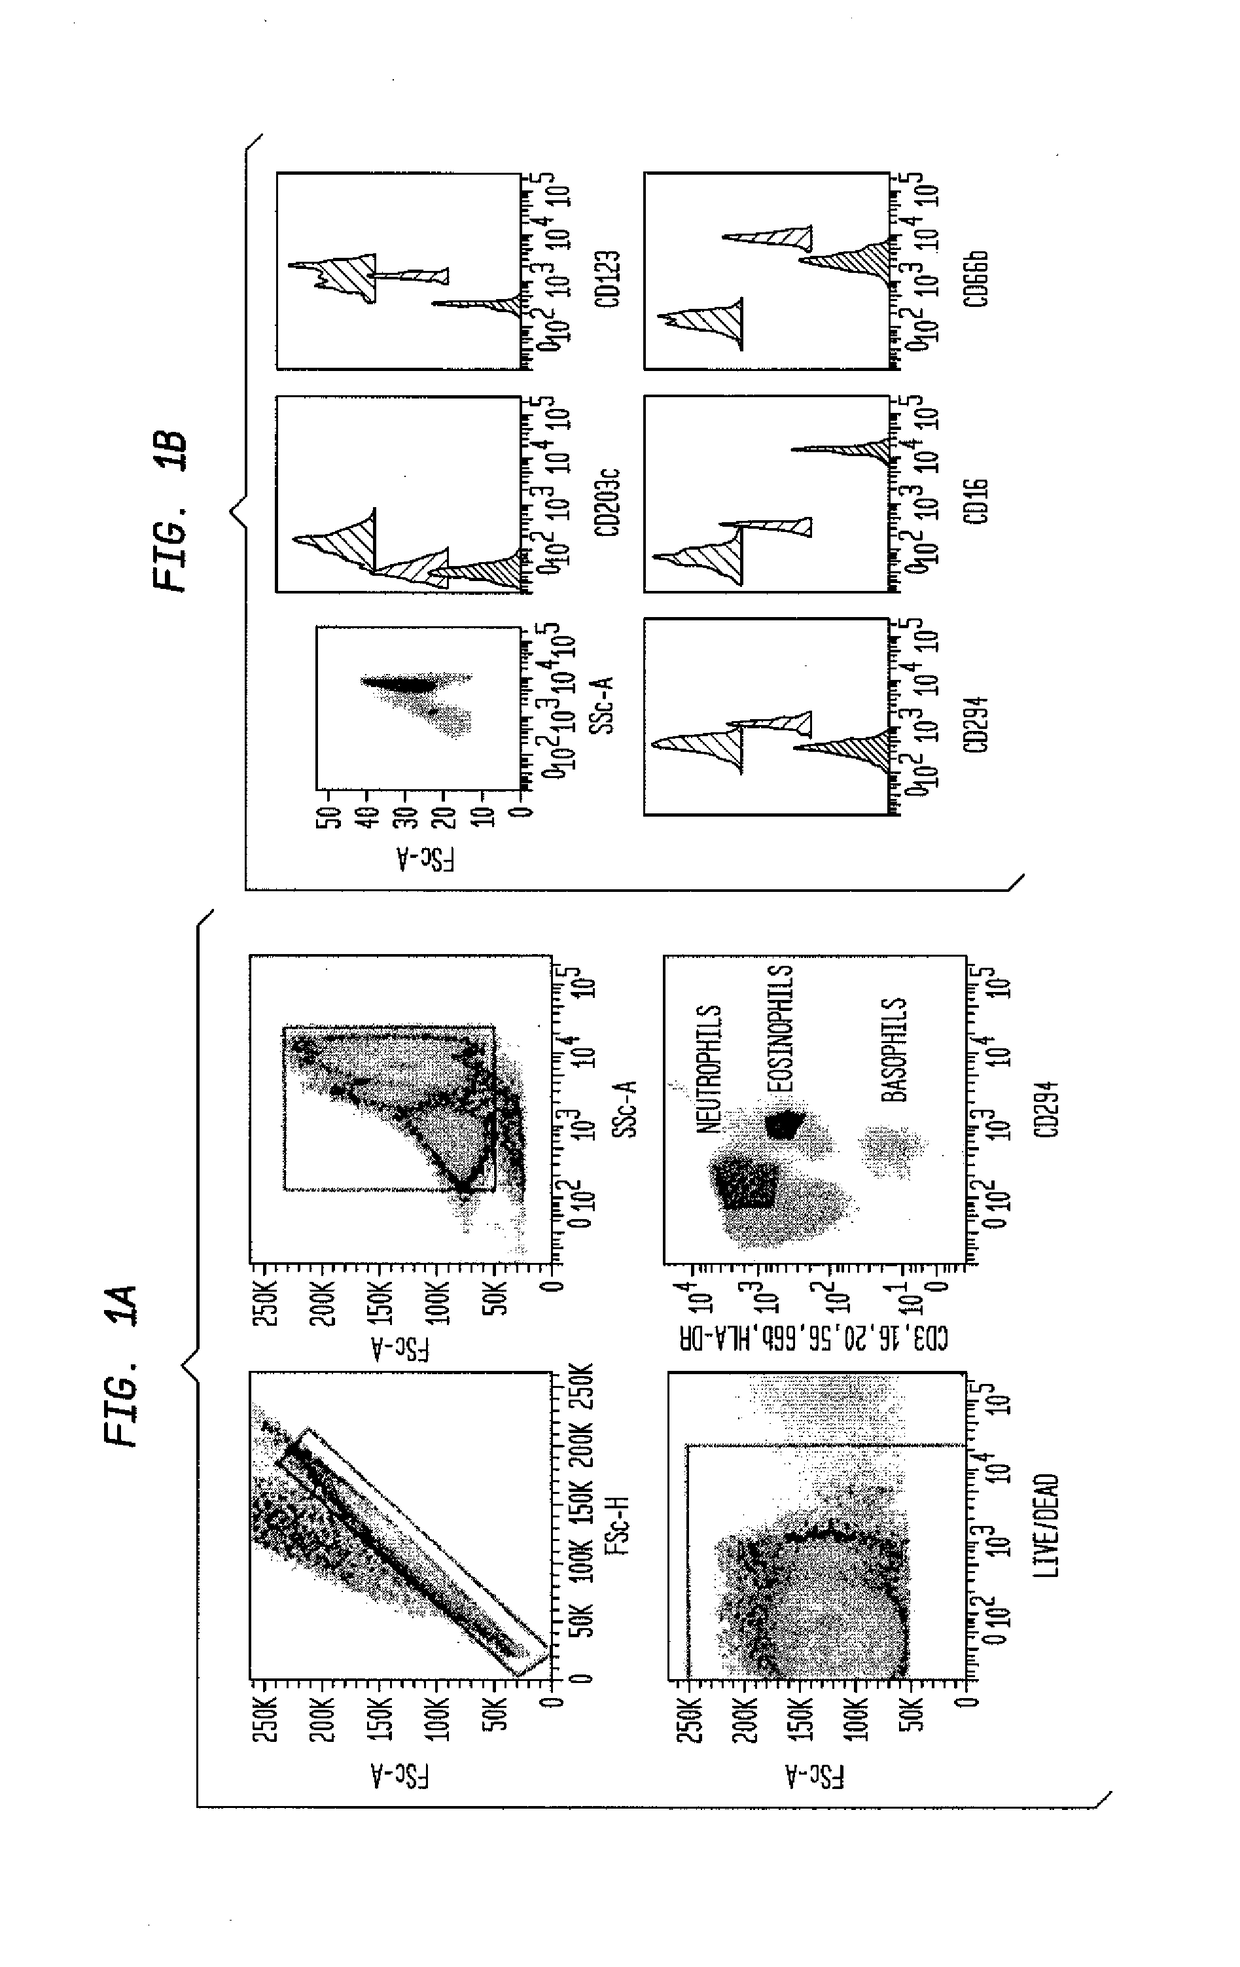 Methods and assays for detecting and quantifying pure subpopulations of white blood cells in immune system disorders